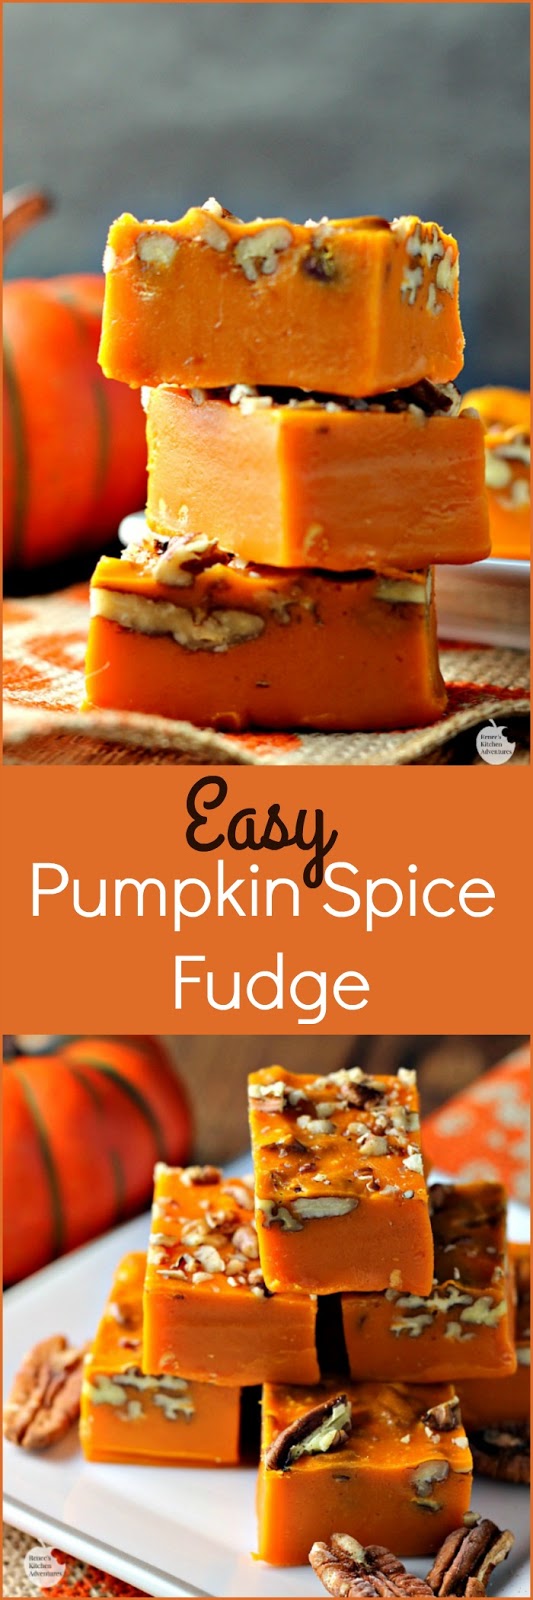 We've found 15 of the Best Pumpkin Spice Desserts and any of these amazing Fall dessert recipes would be great for a Fall Bake Sale, a Halloween Party or Thanksgiving Dinner.  You are going to have a hard time deciding which of these Halloween treats to make first.  Pin these easy to make Thanksgiving Food Ideas for later and follow us for more Thanksgiving Dessert Ideas. 